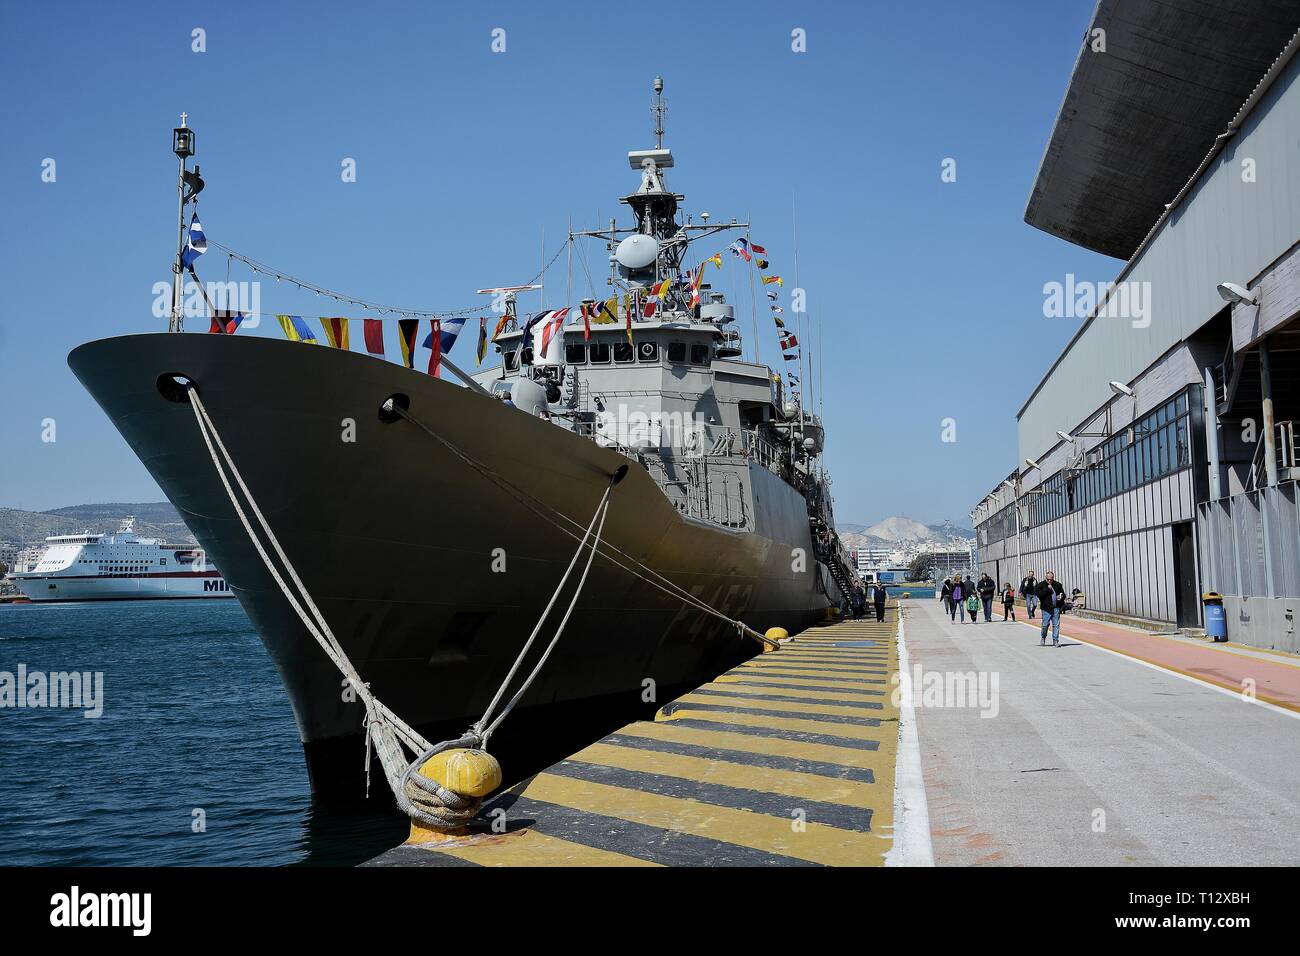 Frigate of Greek Navy 'Idra' seen at Piraeus Port. Due to the Greek Independence Day Piraeus Port is open to the public, a national holiday celebrated annually in Greece on March 25, commemorating the start of the War of Greek’s Independence in 1821. Stock Photo